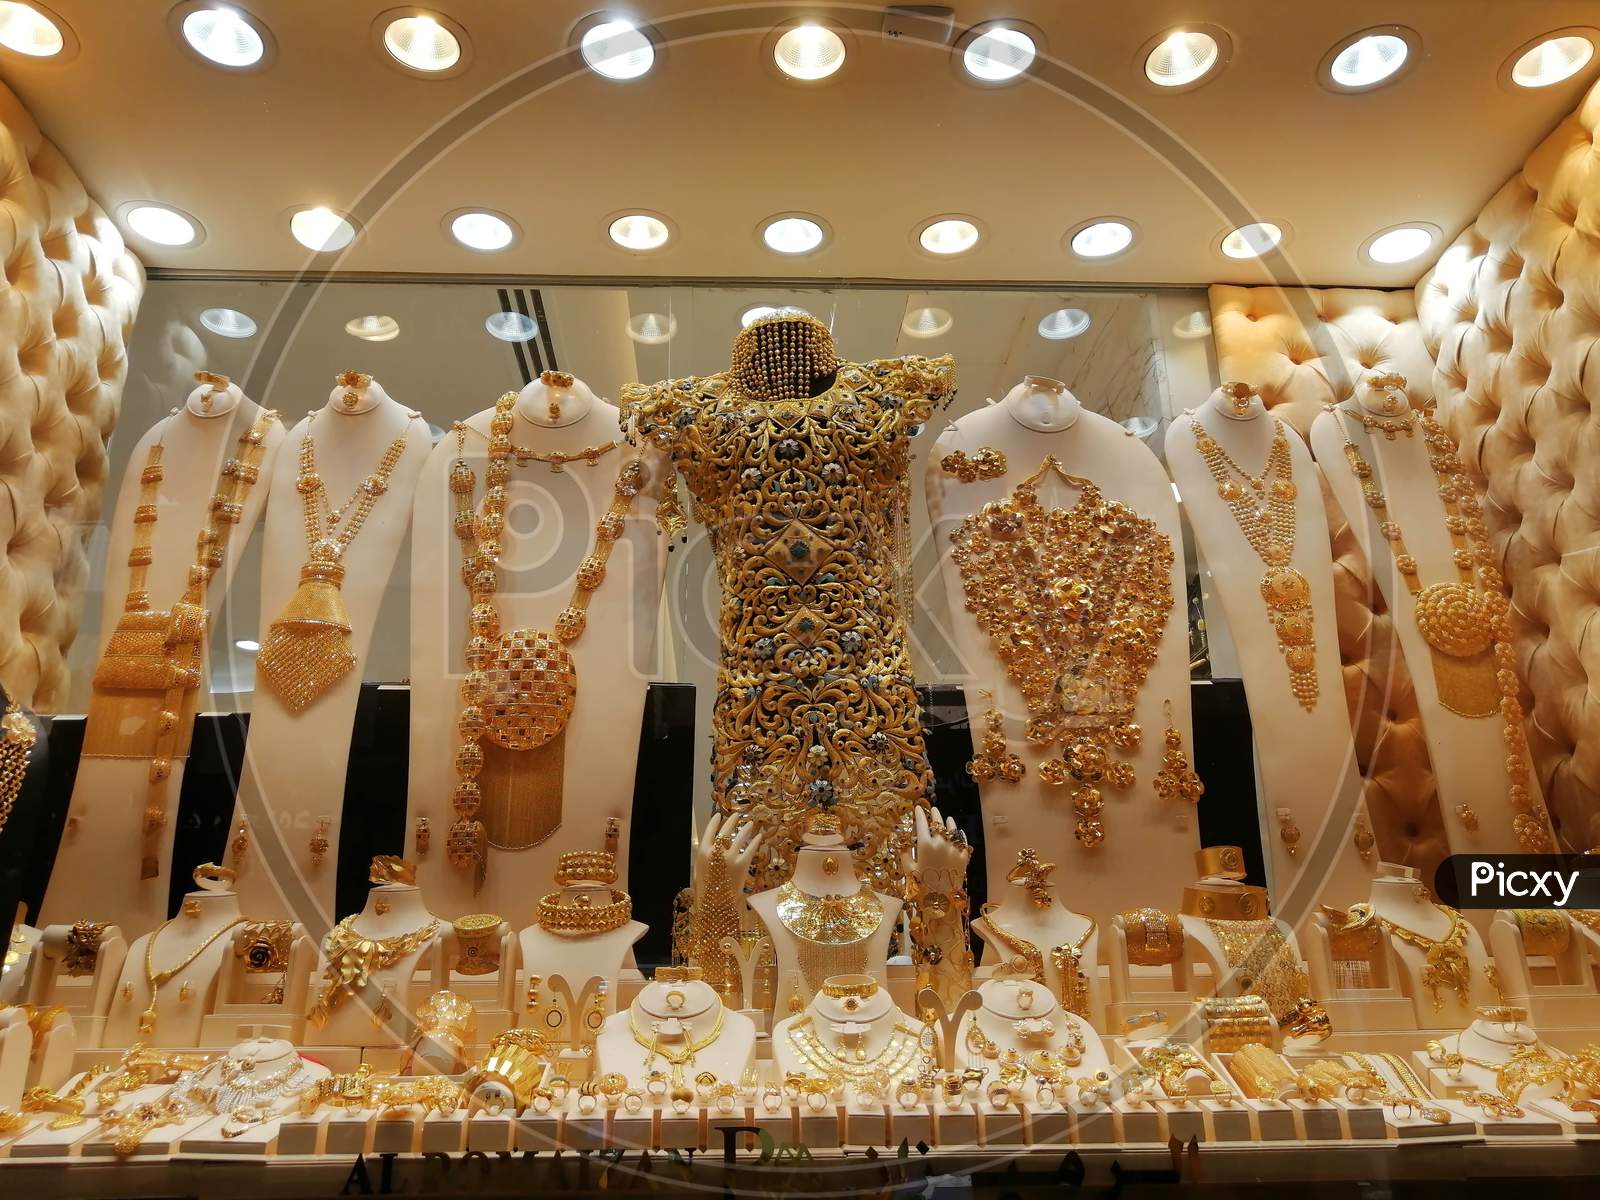 Traditional market of gold souk in dubai